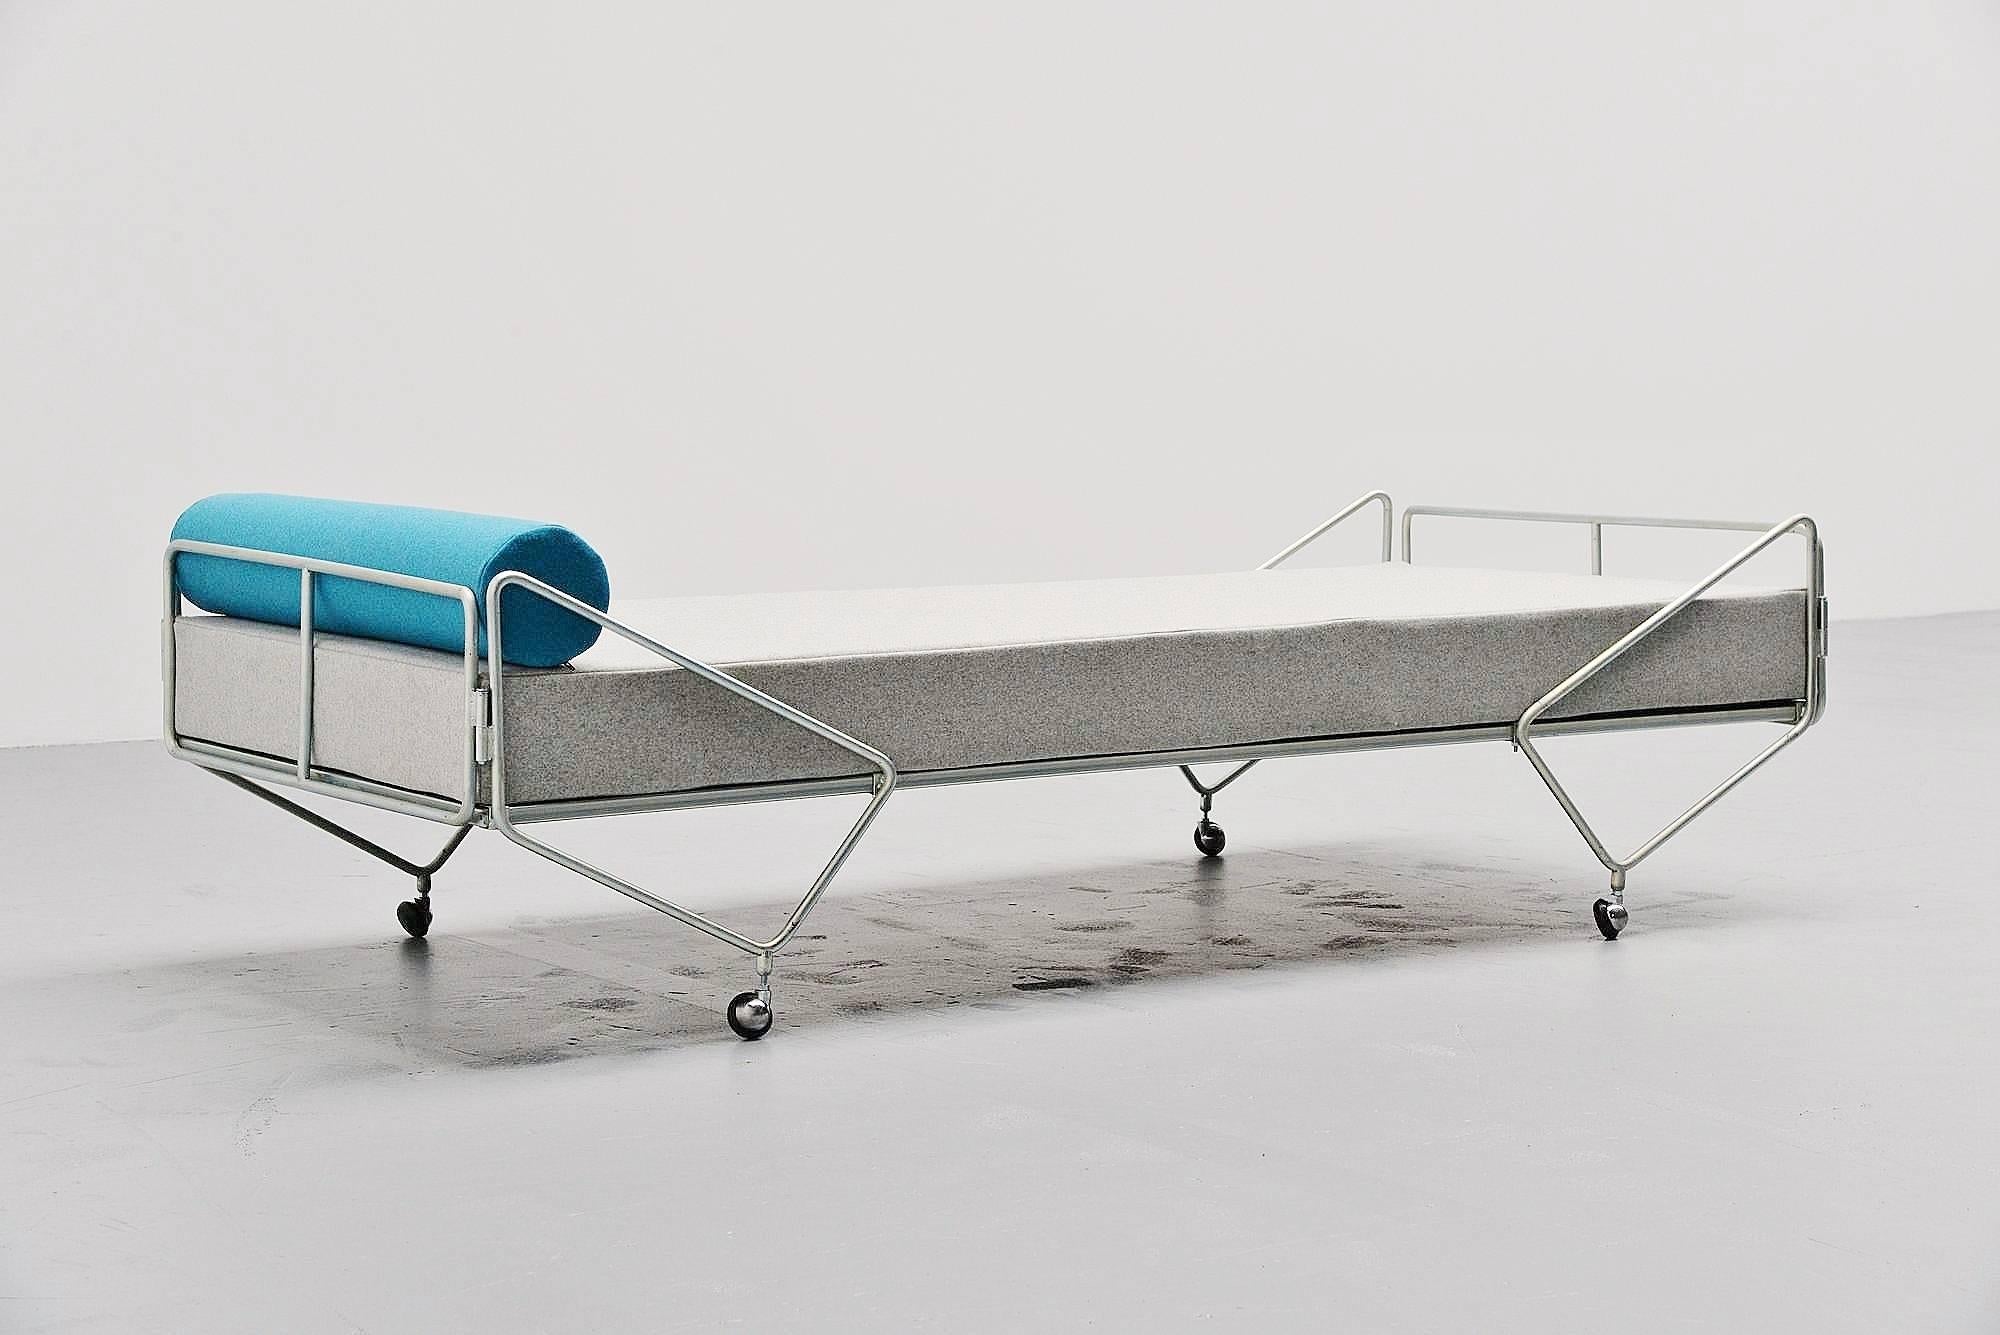 Super rare Apta daybed designed by Gio Ponti and produced by Walter Ponti, Italy, 1970. This bed was purchased directly from the Ponti family cause this bed was never mass produced. Only four examples were made and all stayed in the Ponti family